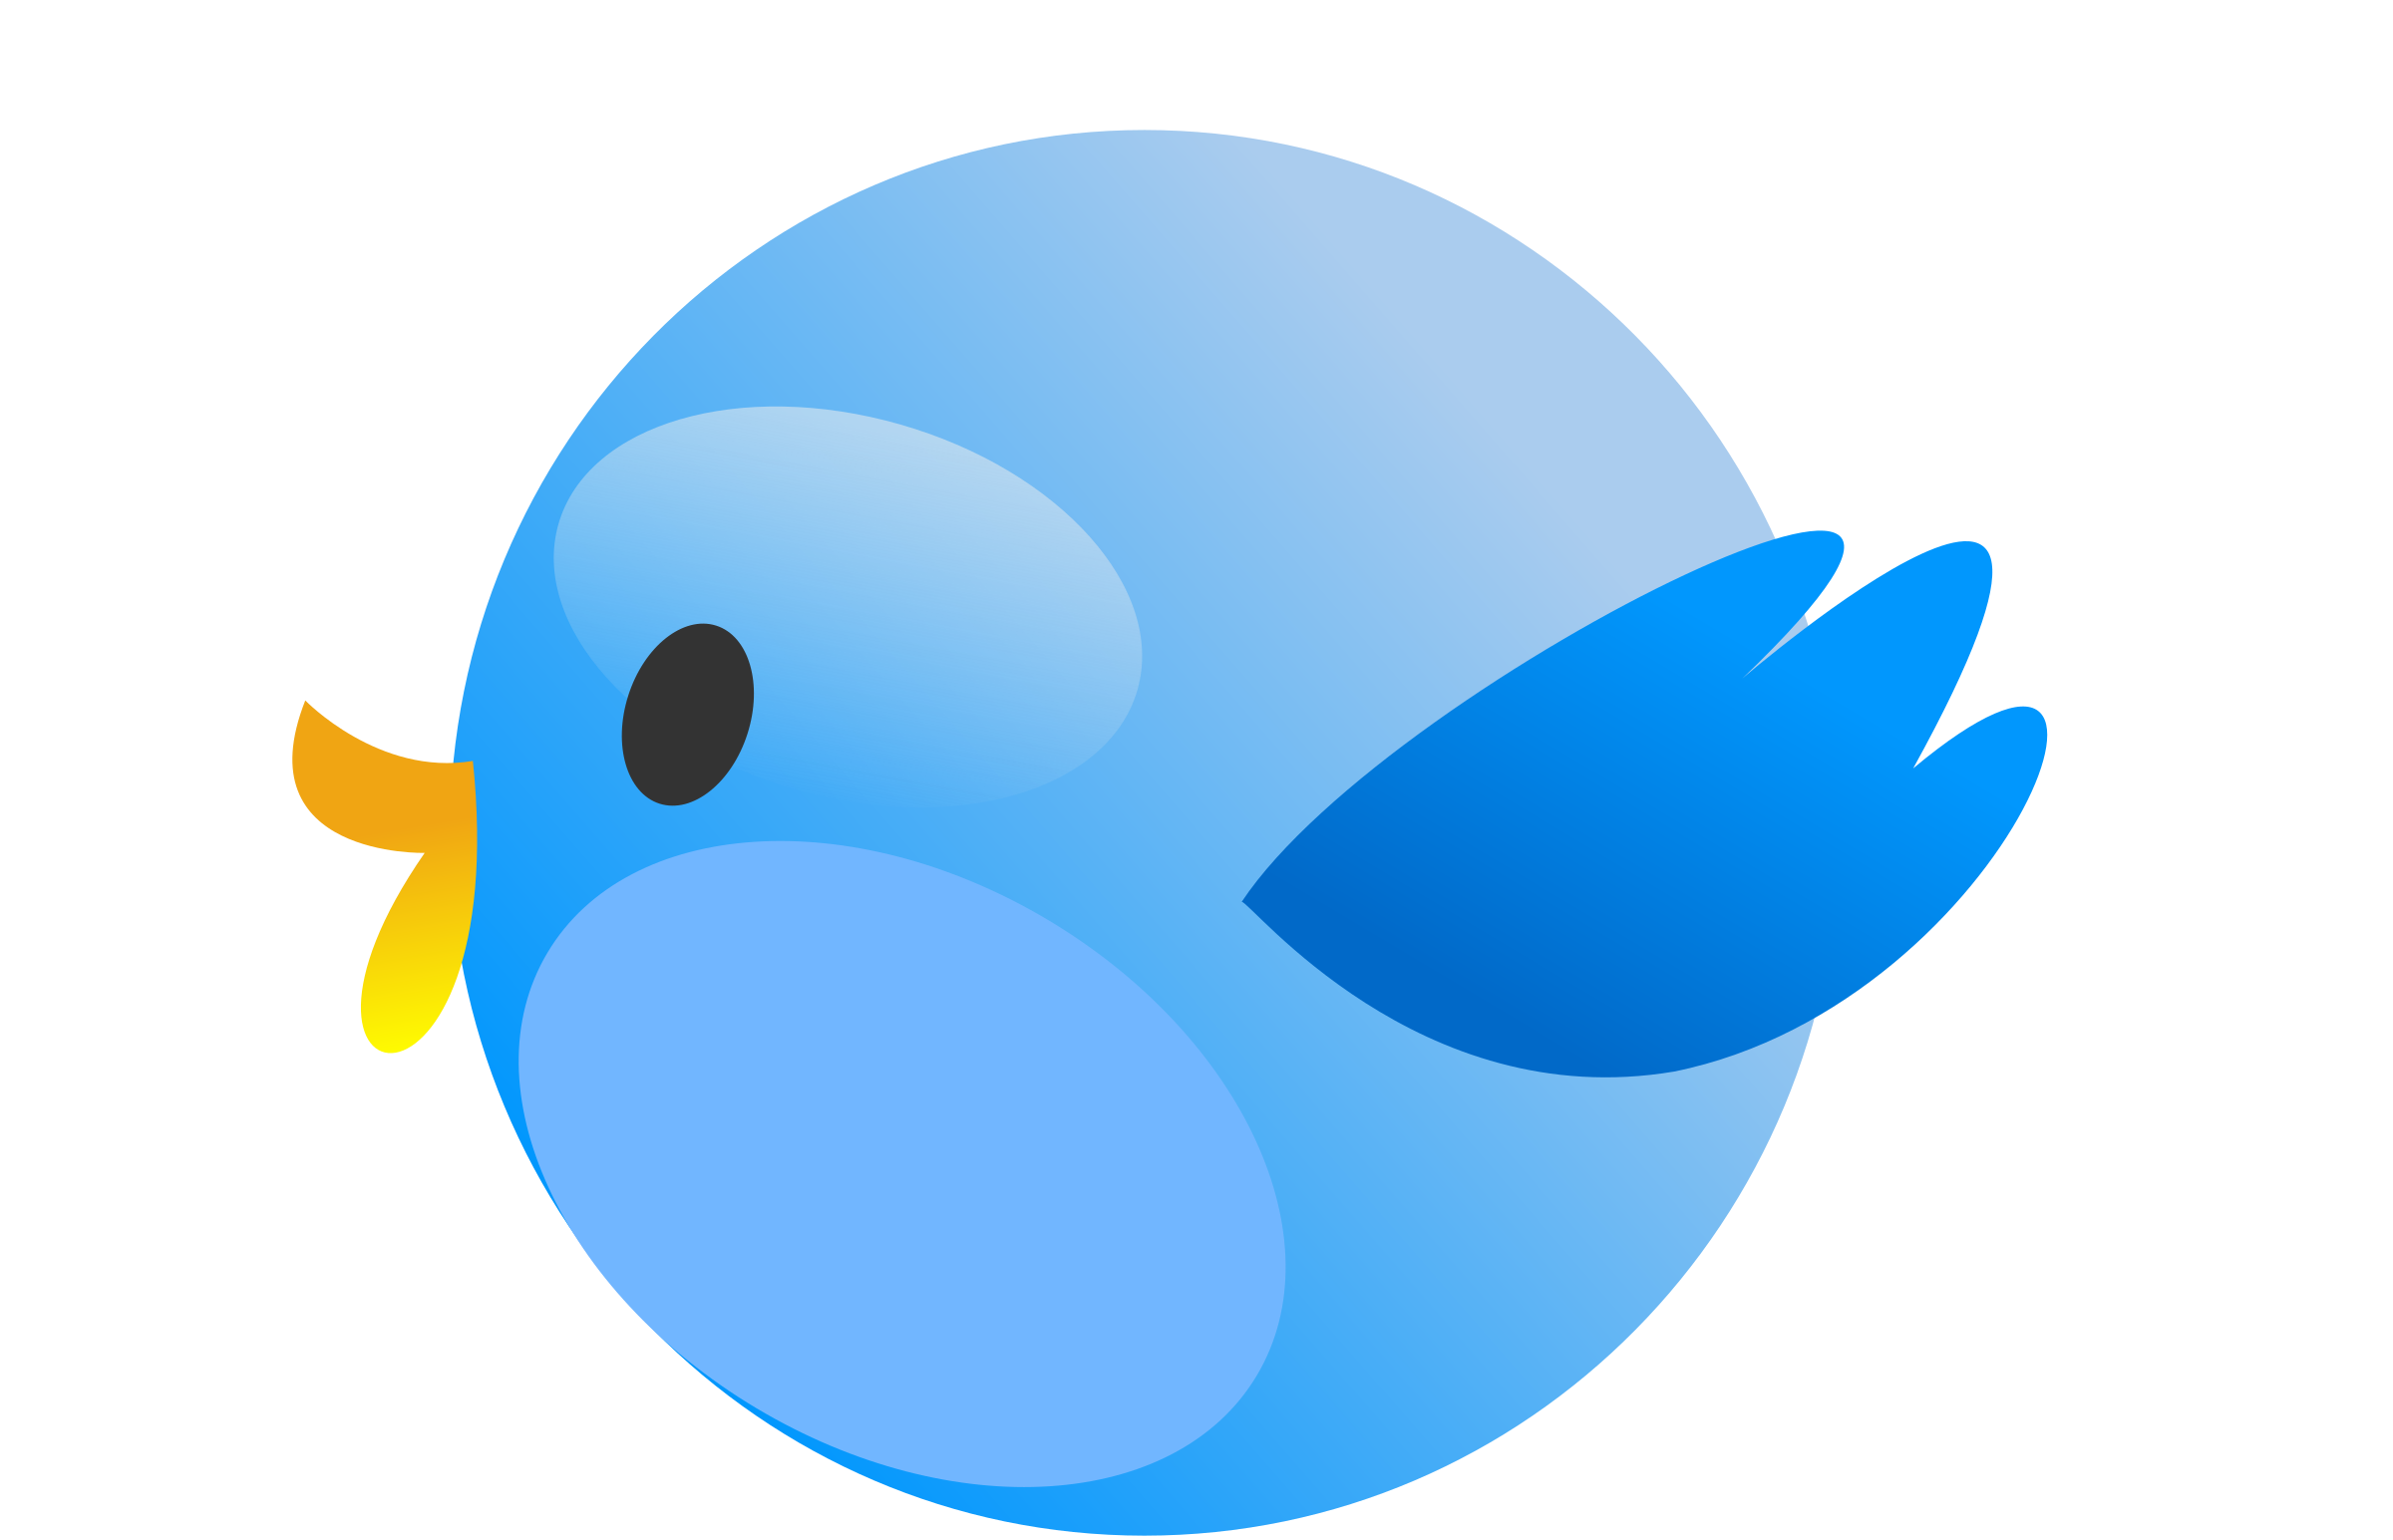 Bird big image png. Email clipart cutie